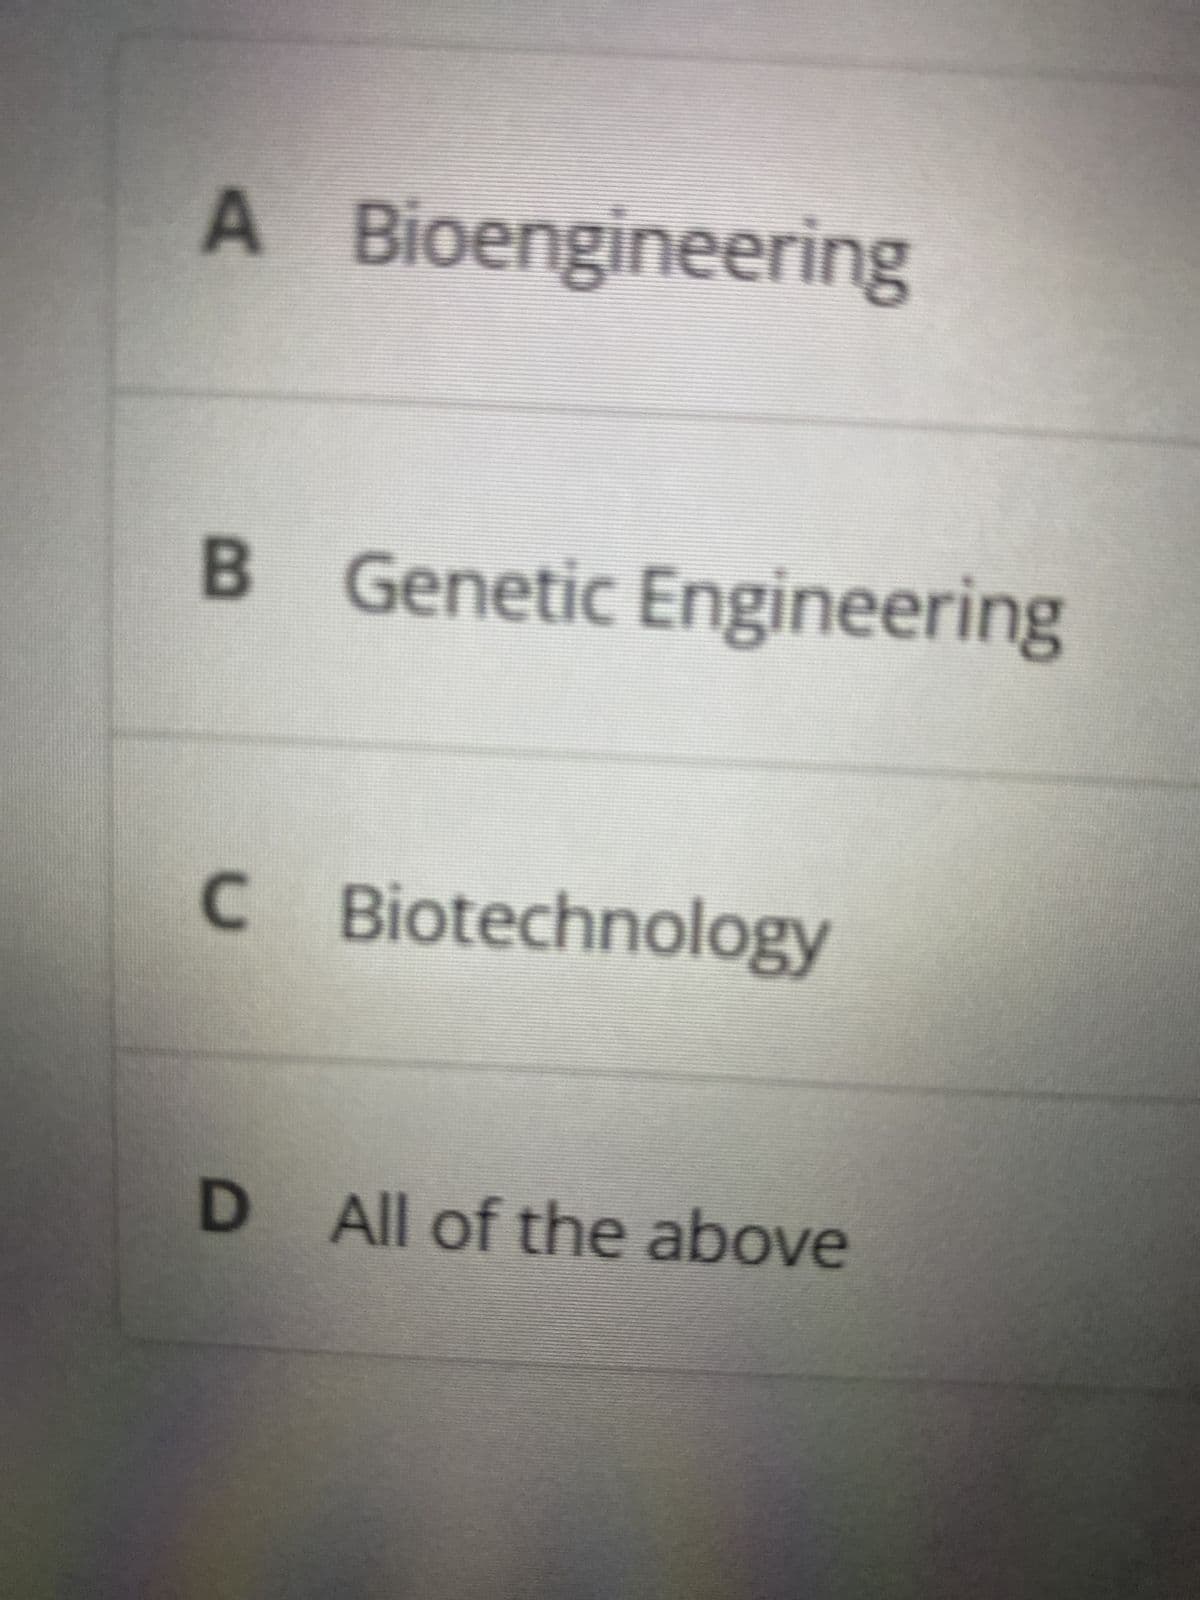 A Bioengineering
B Genetic Engineering
C Biotechnology
D All of the above